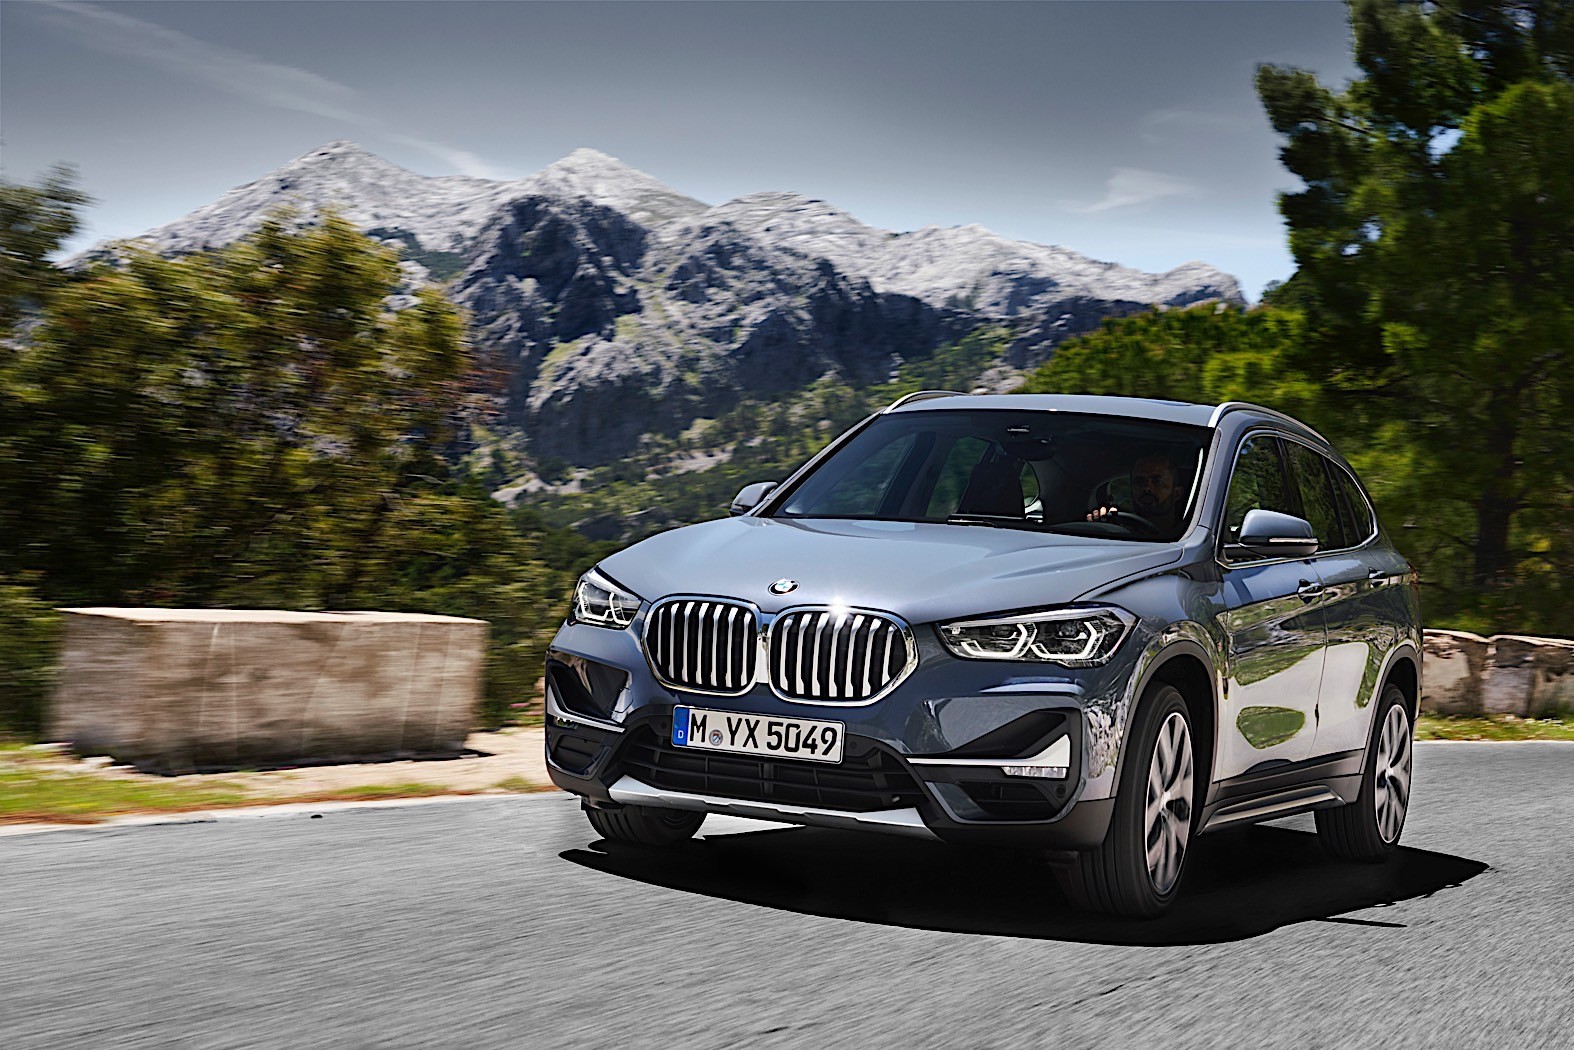 2020 BMW X1 Breaks Cover with Larger Grille and the Promise of a Plug